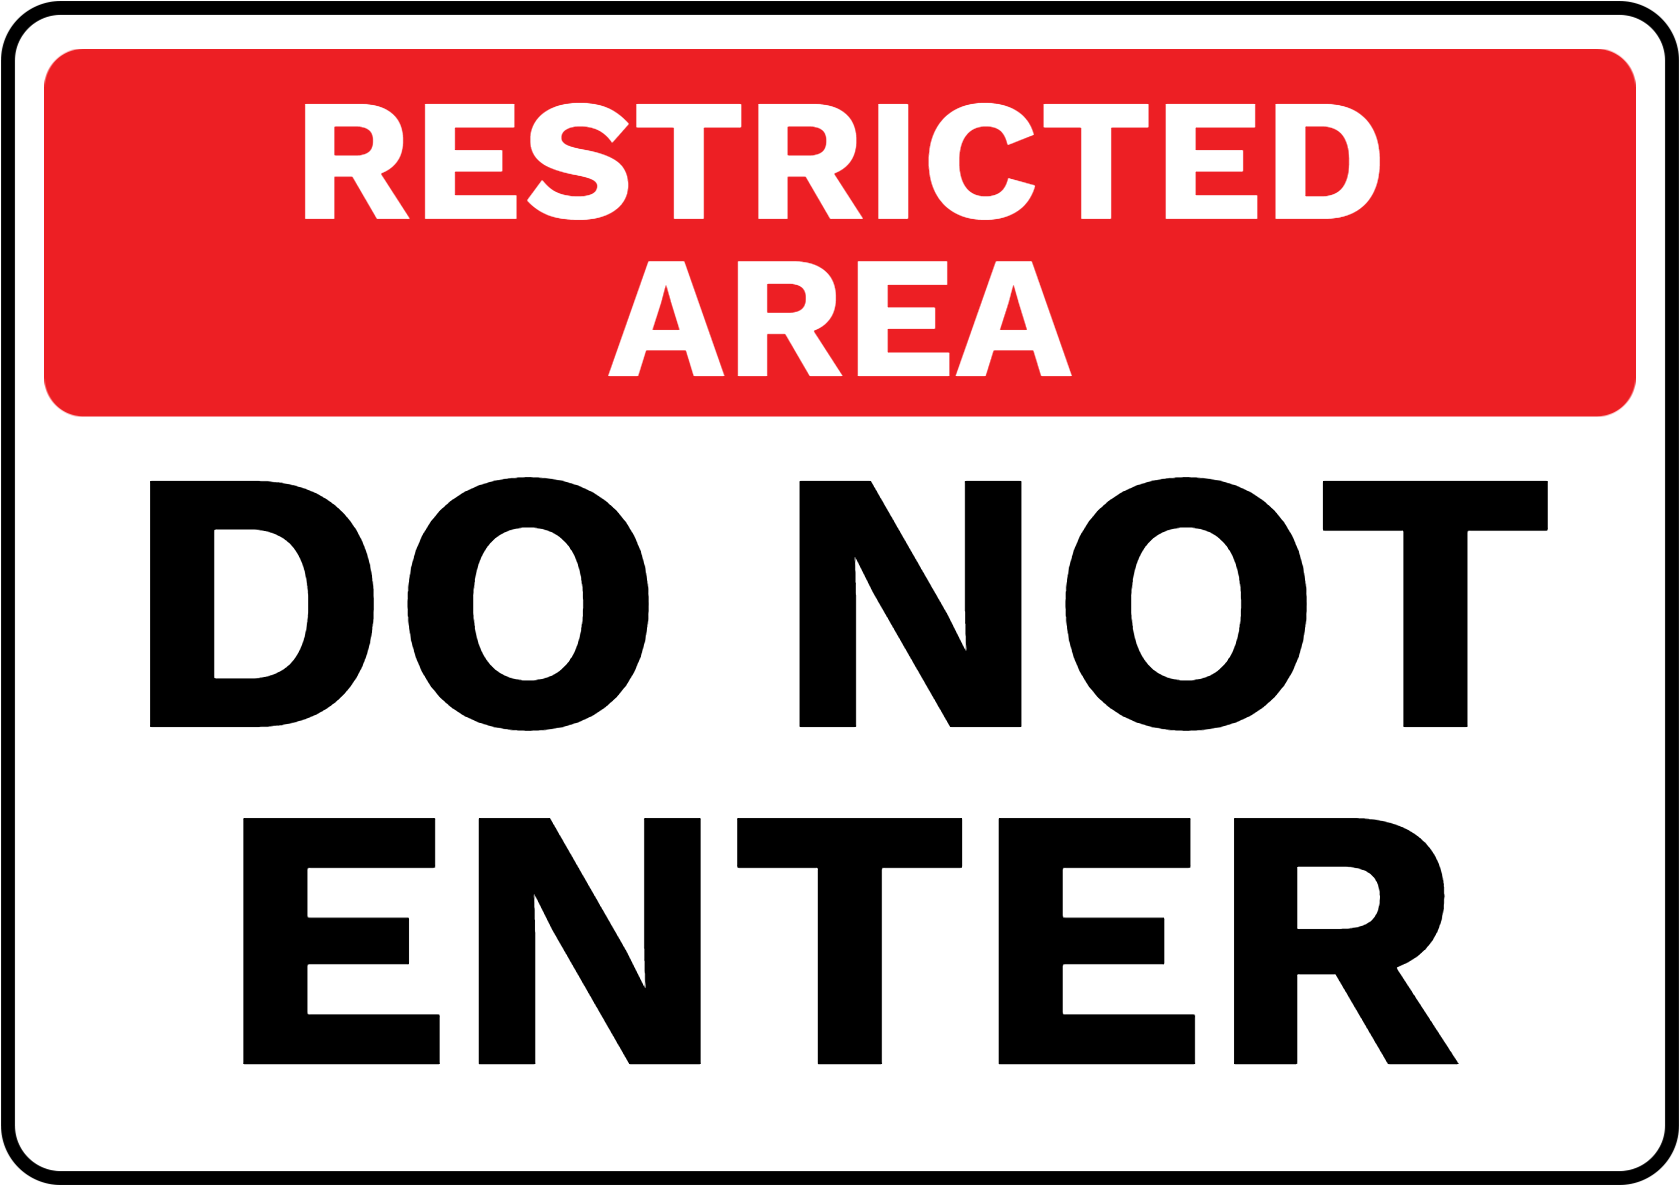 Restricted Area Do Not Enter Sign Australia - Unt Health Science Center (1684x1191)